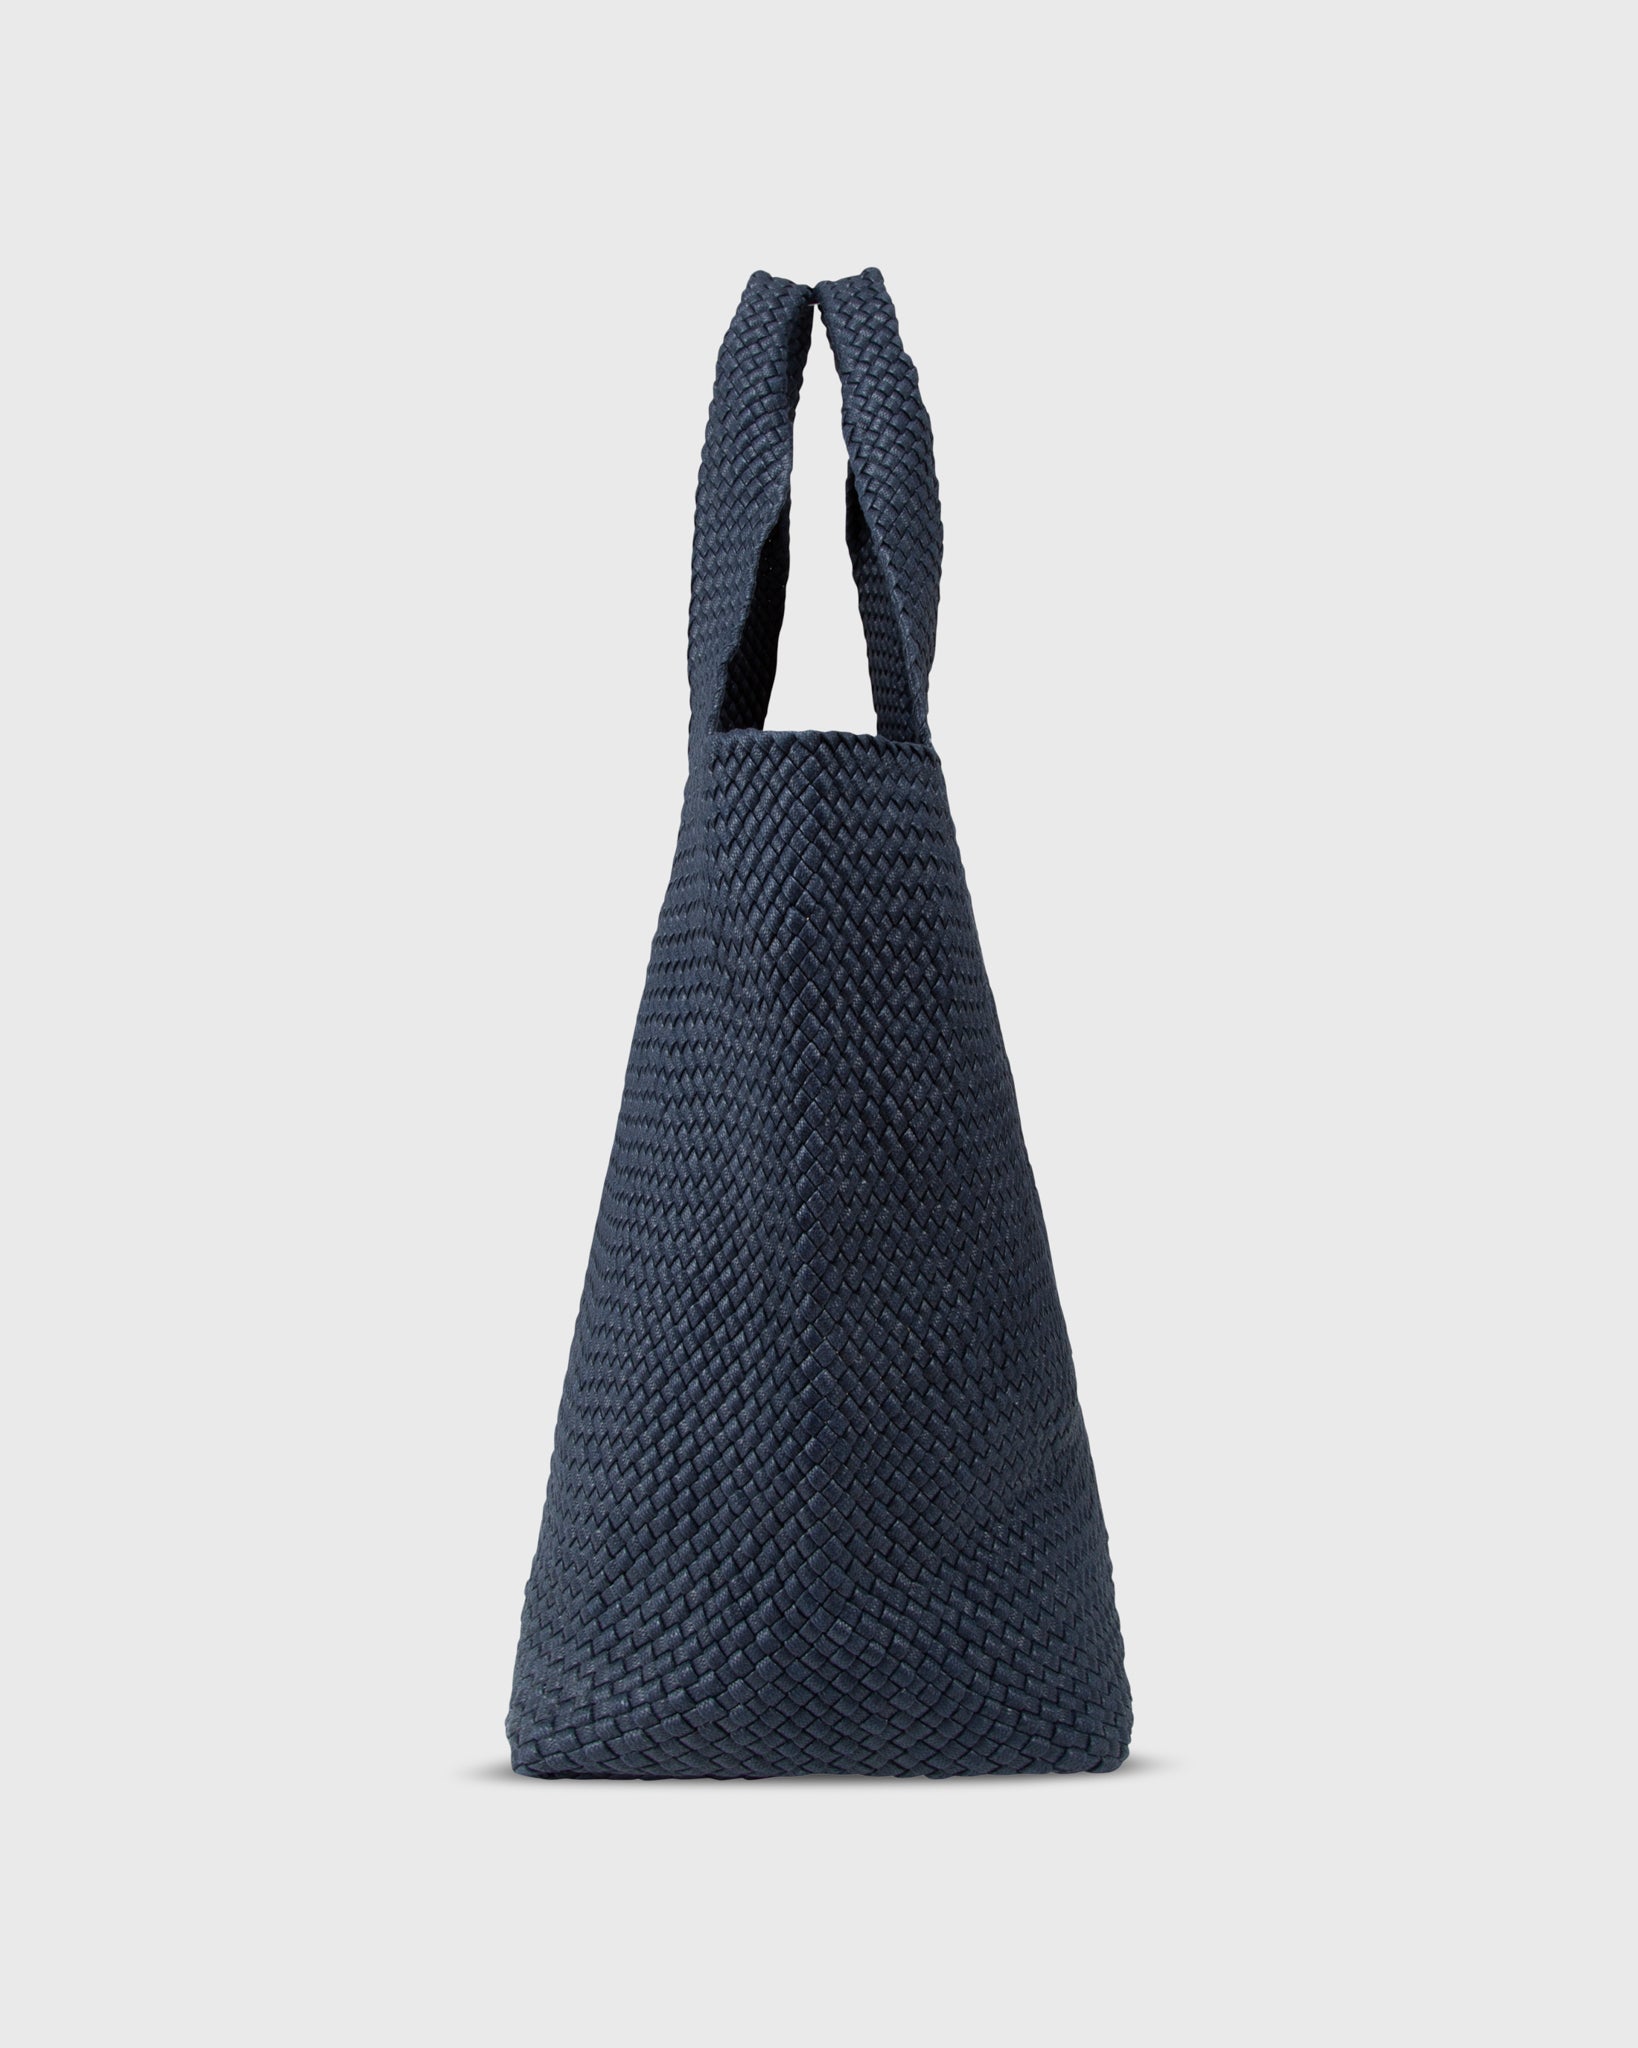 Mercato Handwoven Tote in Navy Coated Cotton